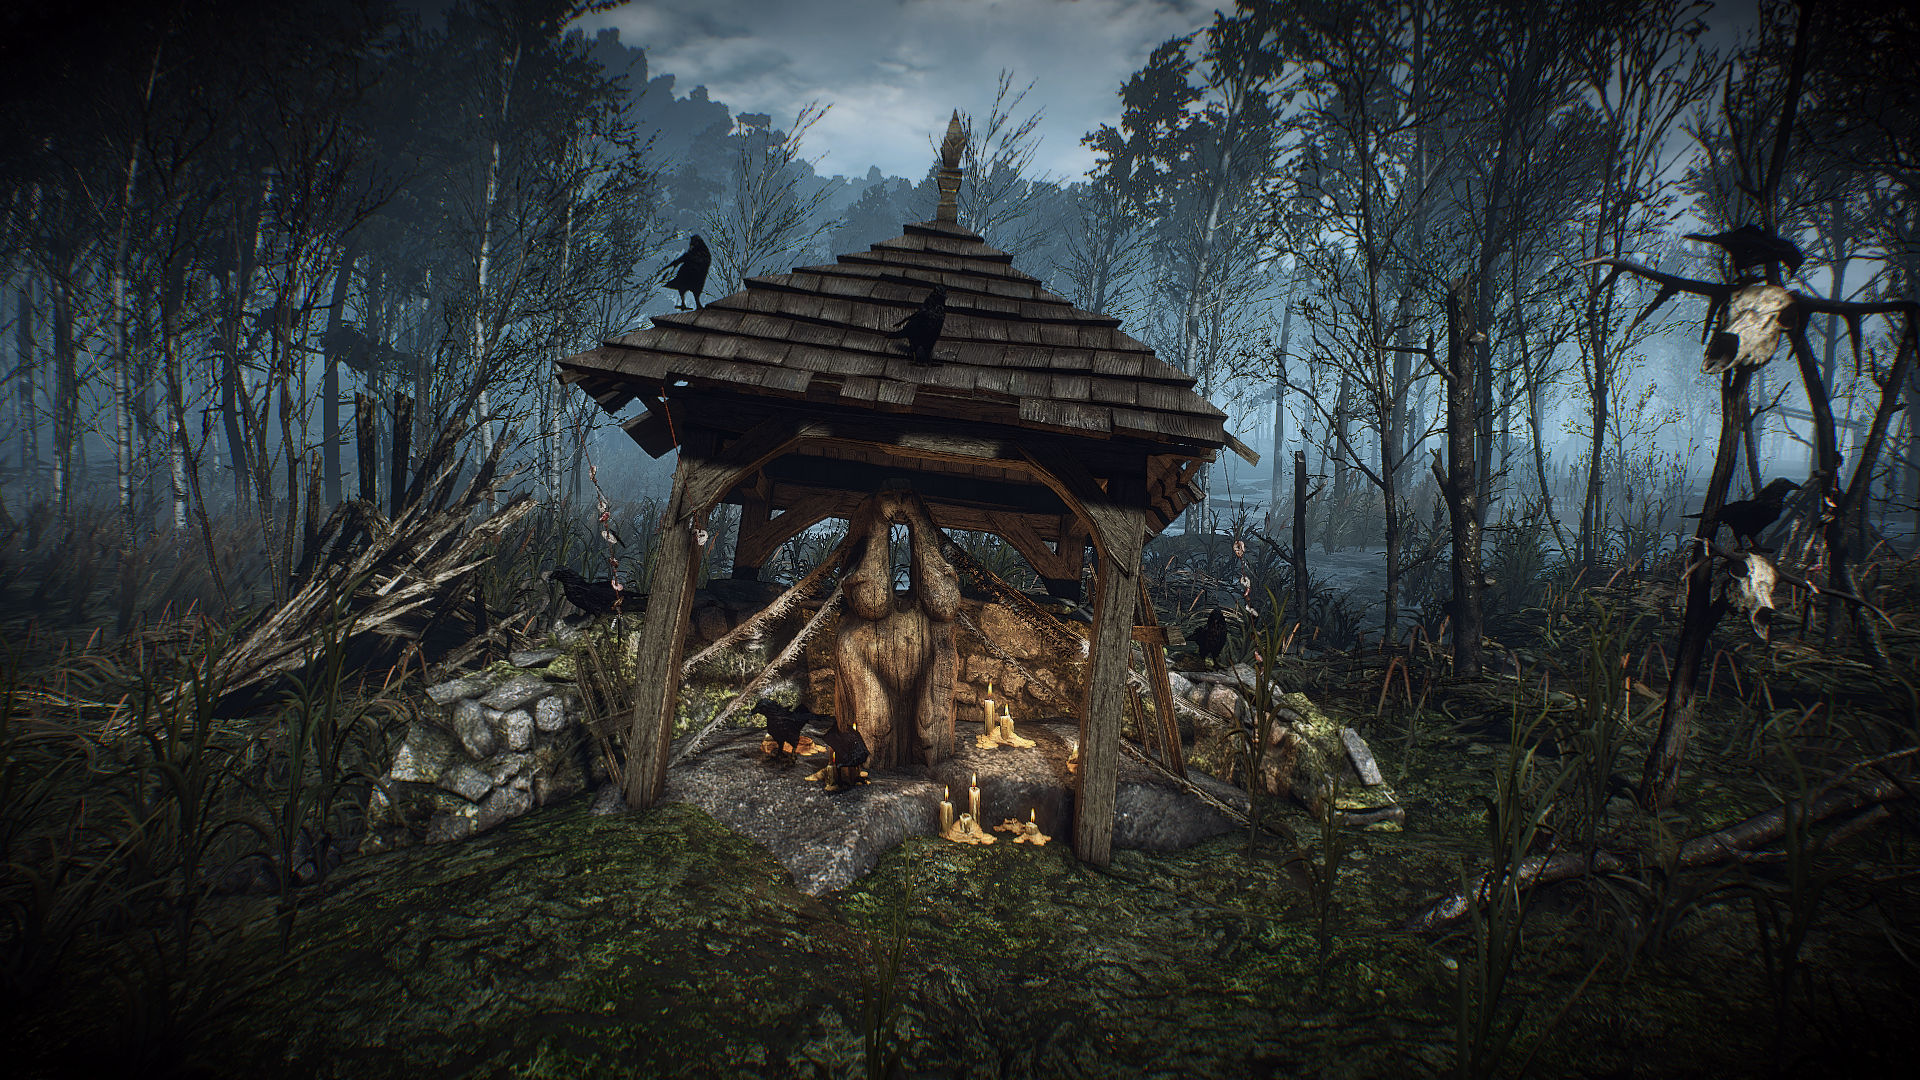 General 1920x1080 The Witcher 3: Wild Hunt video games RPG screen shot PC gaming